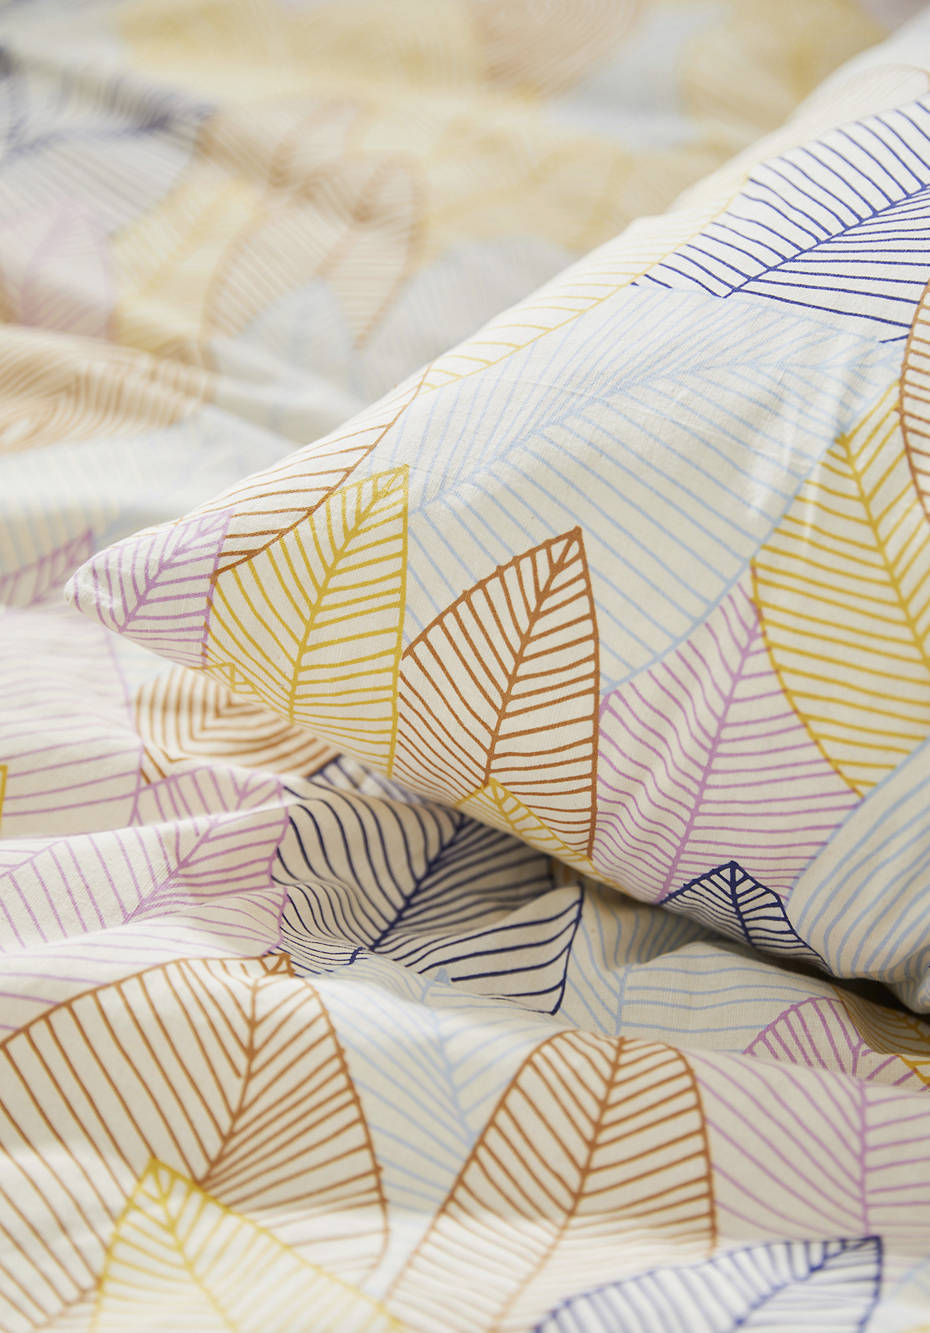 Levi bed linen made from organic cotton with hemp